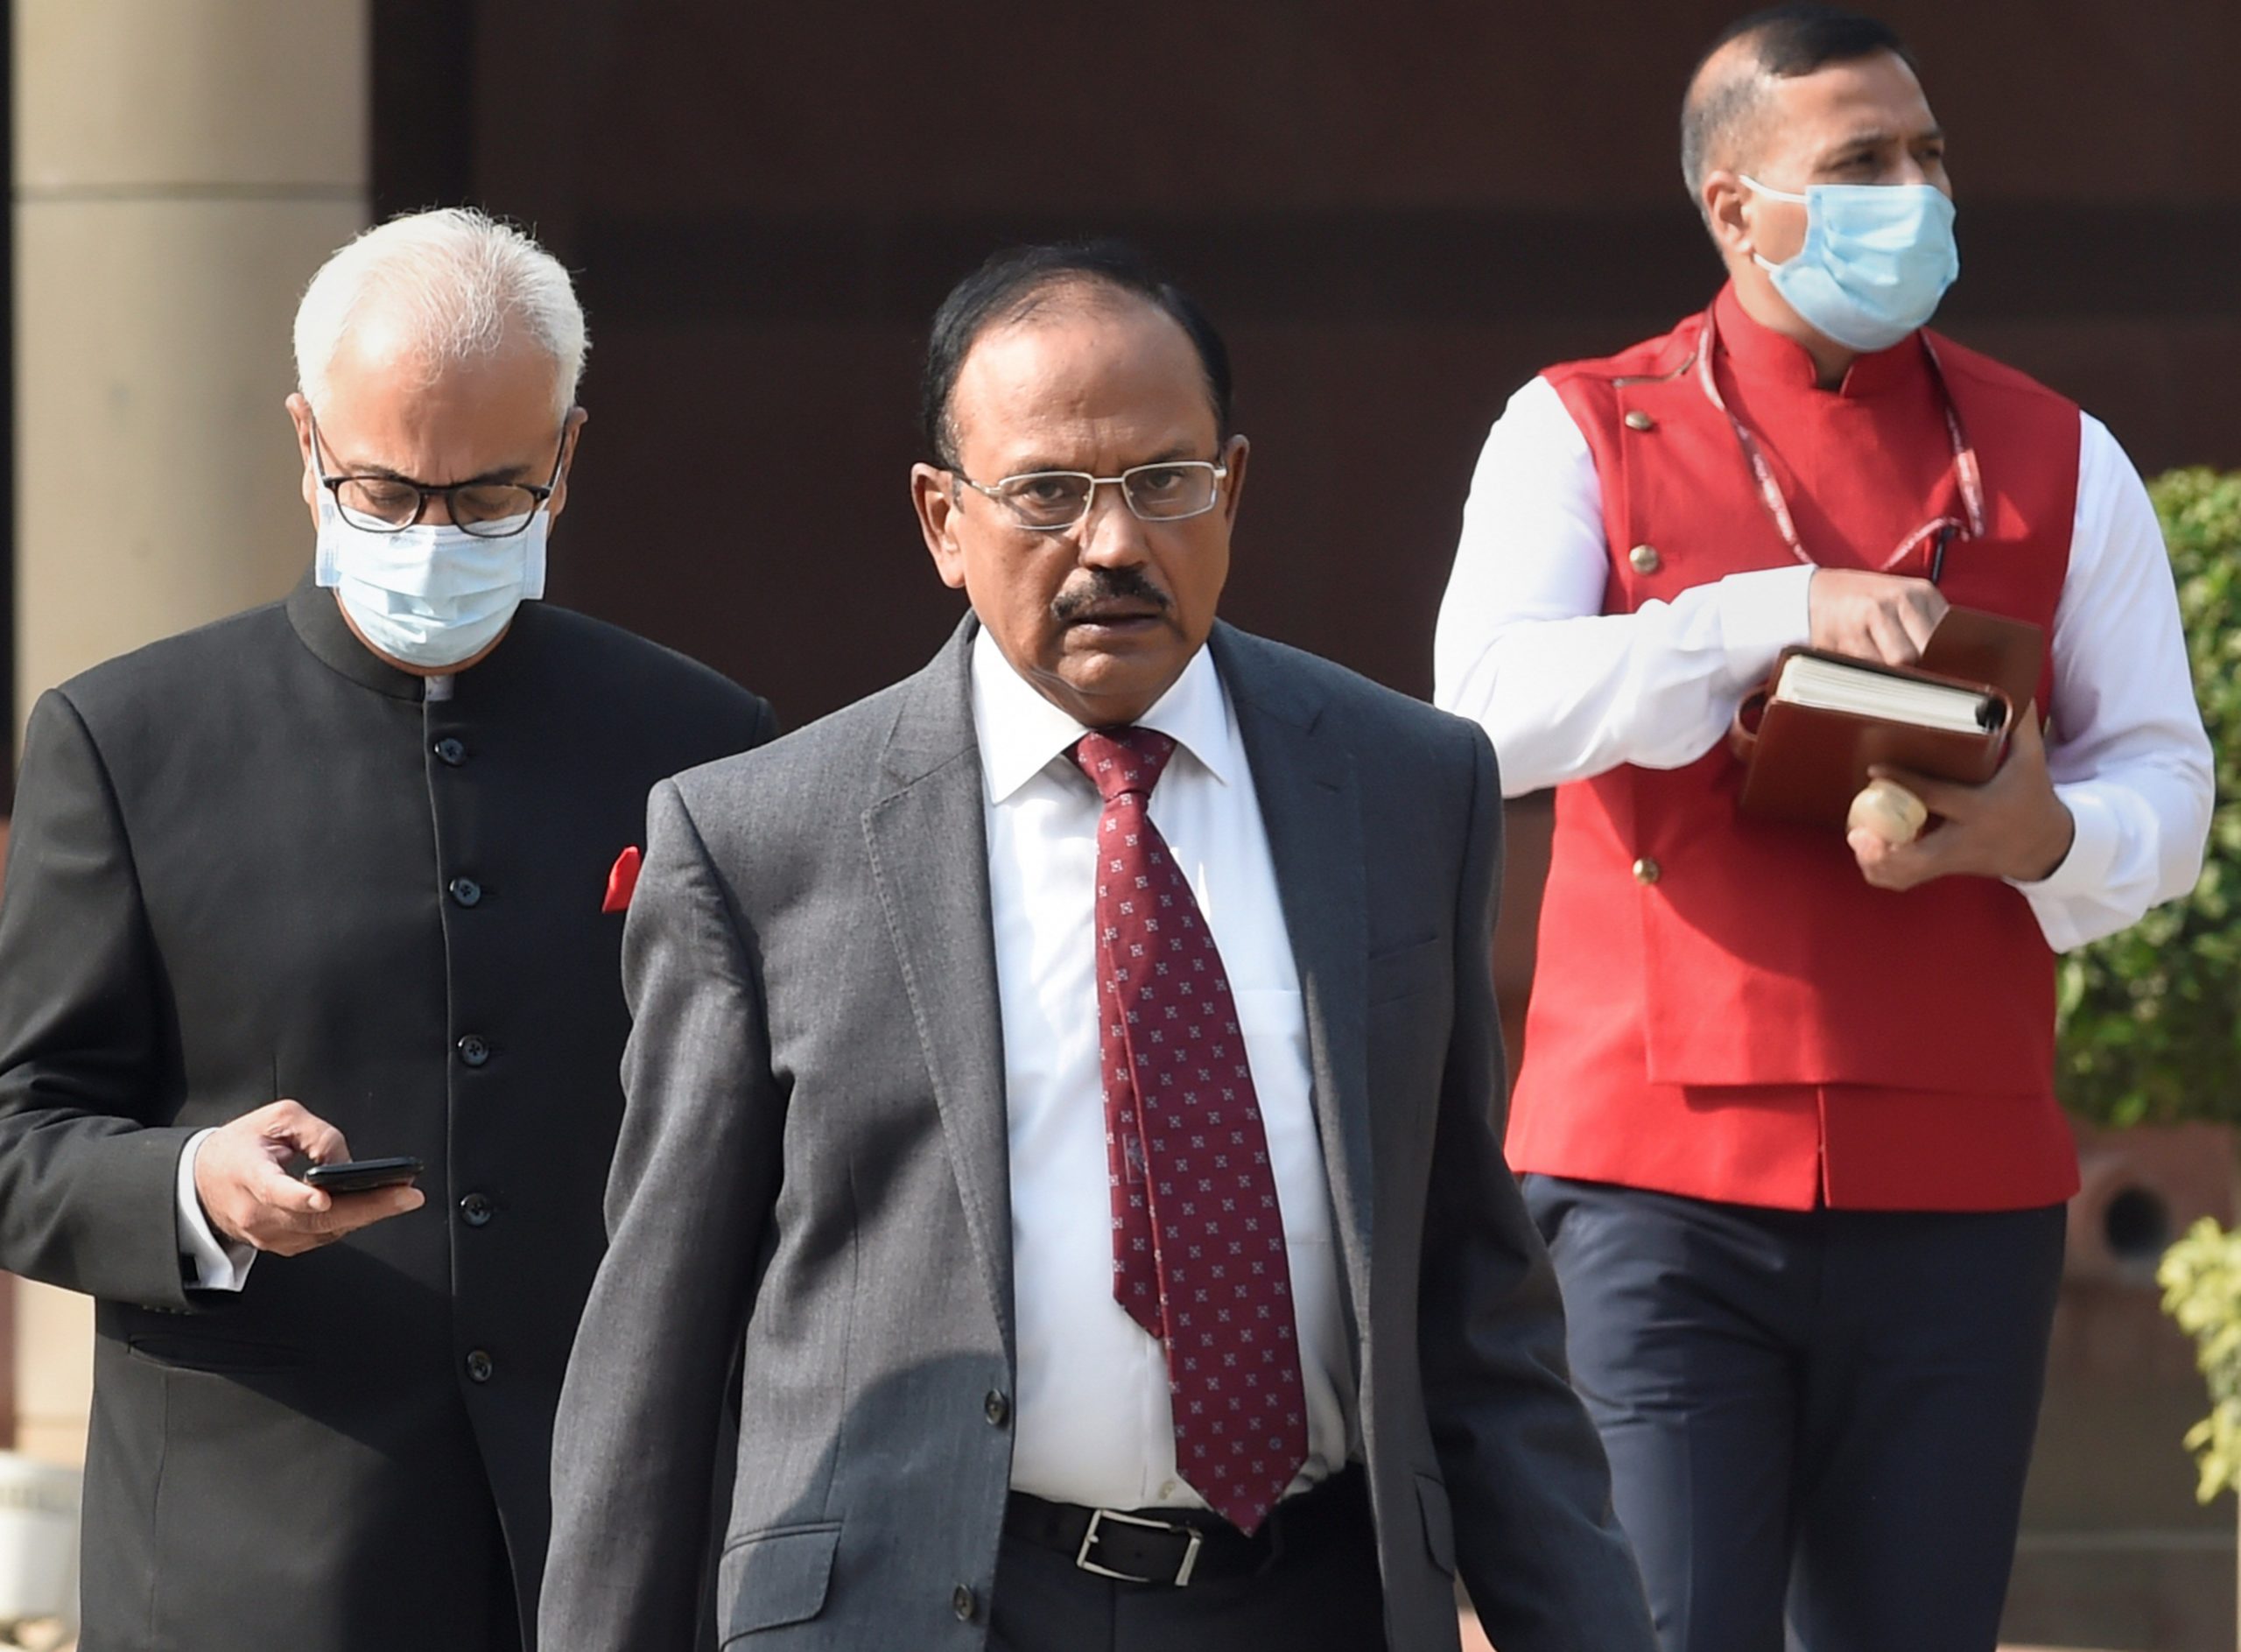 Man tries to enter NSA Ajit Doval’s residence, arrested